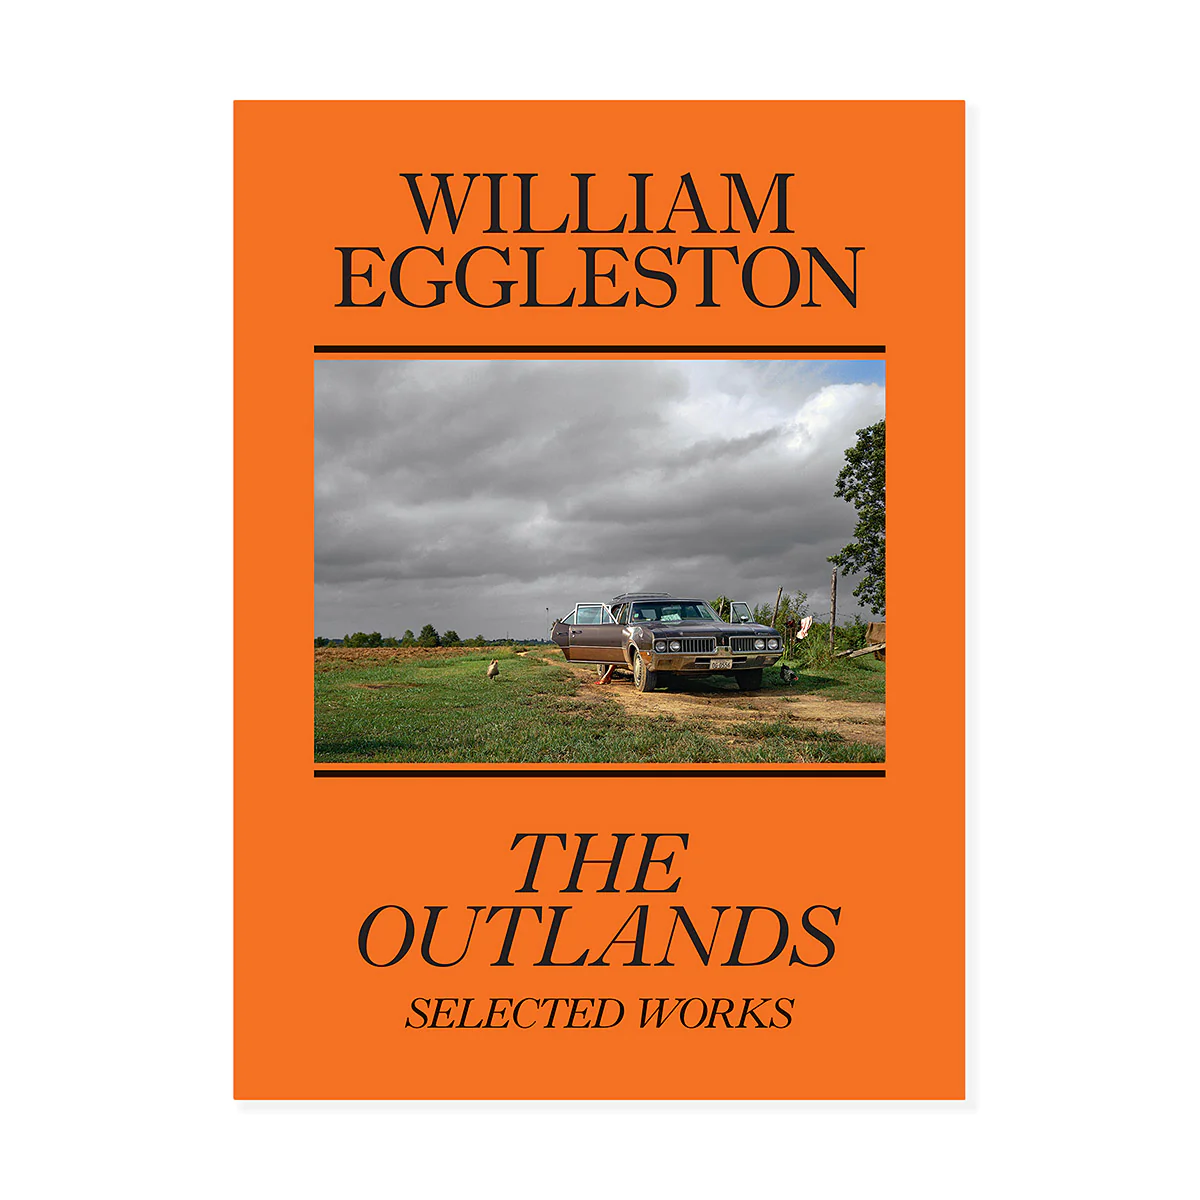 William Eggleston: The Outlands - Selected Works